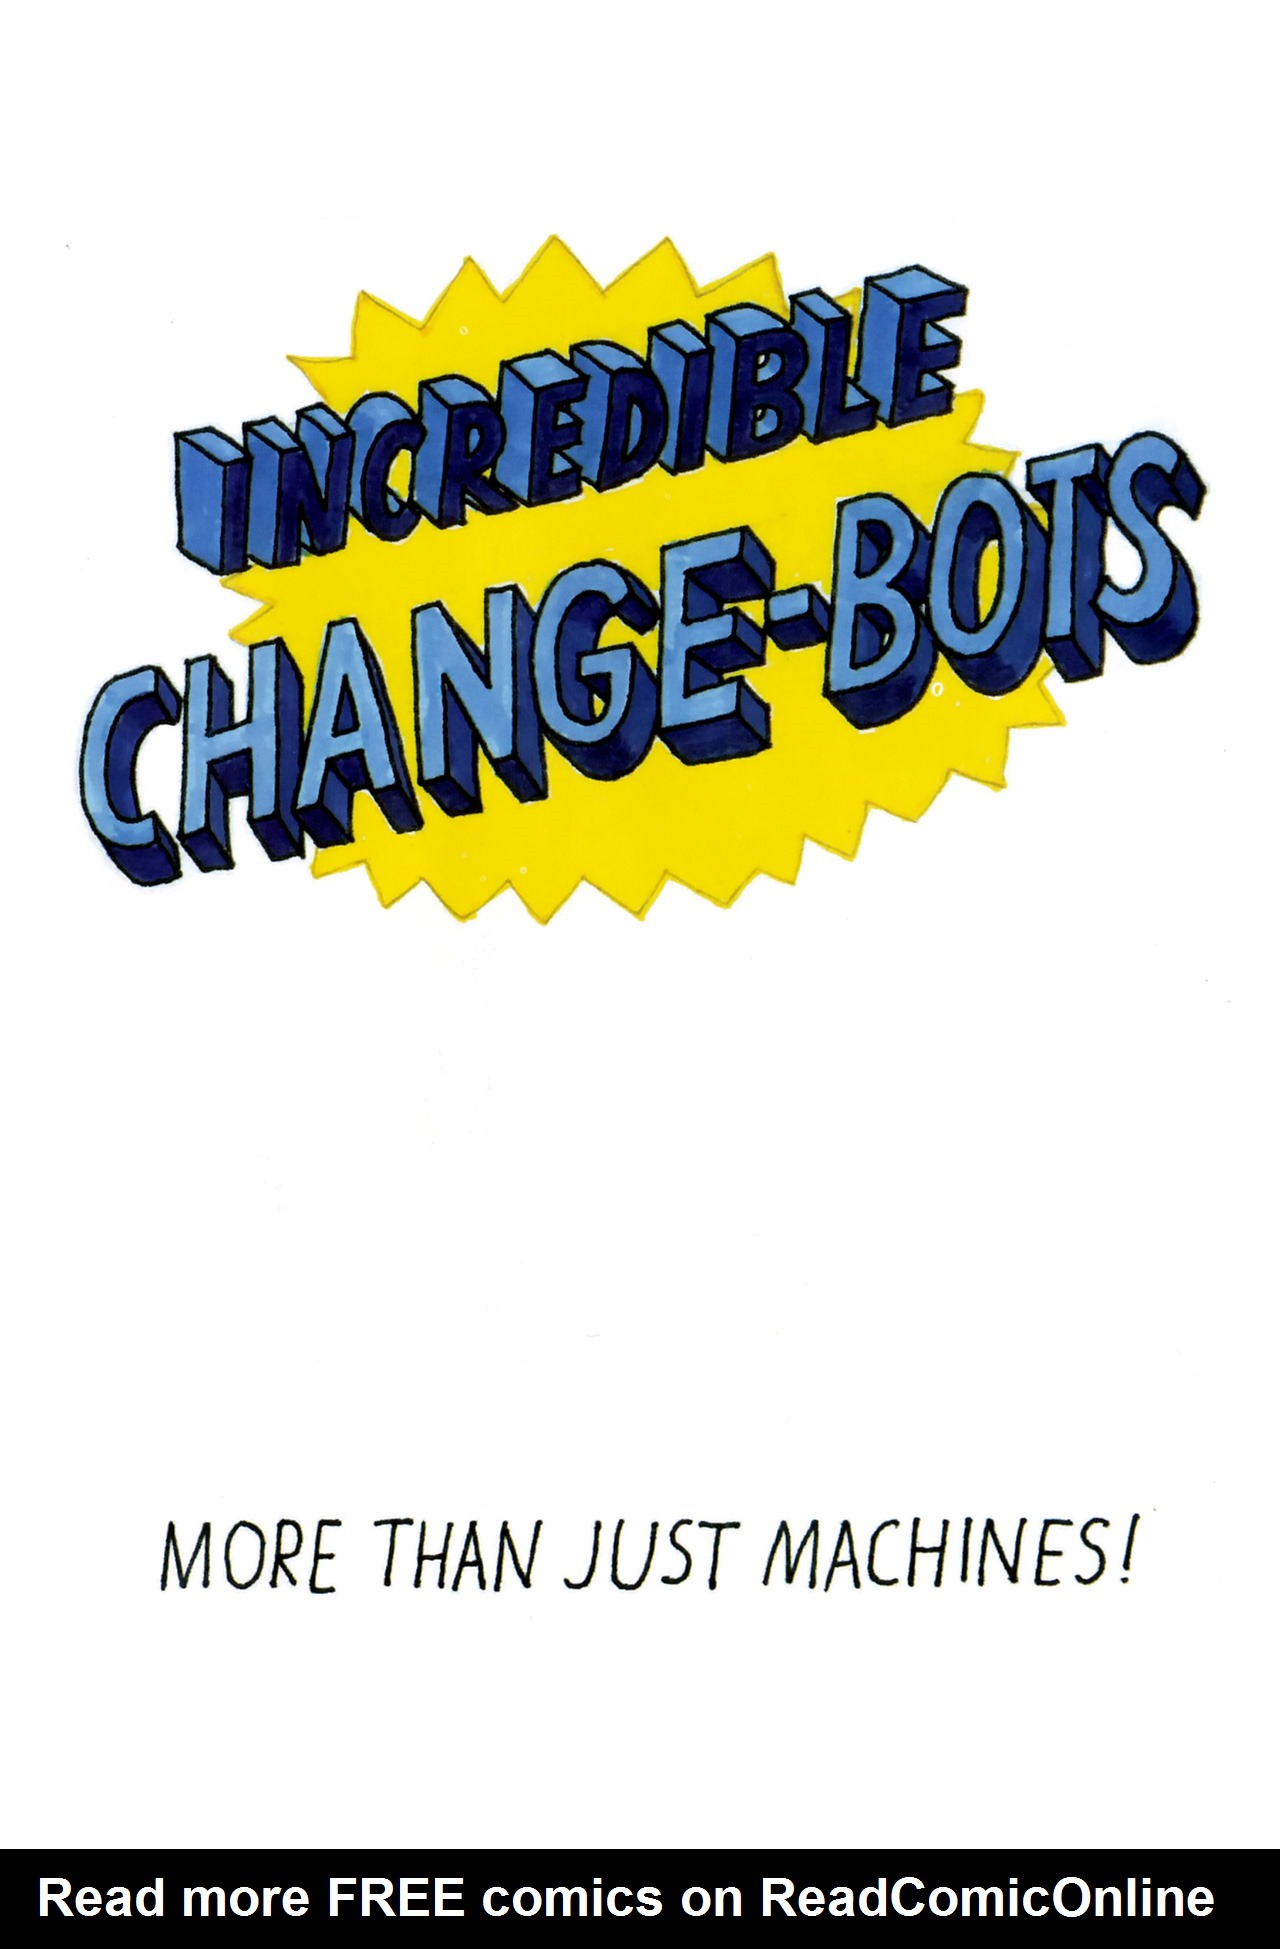 Read online Incredible Change-Bots comic -  Issue # TPB 1 - 4